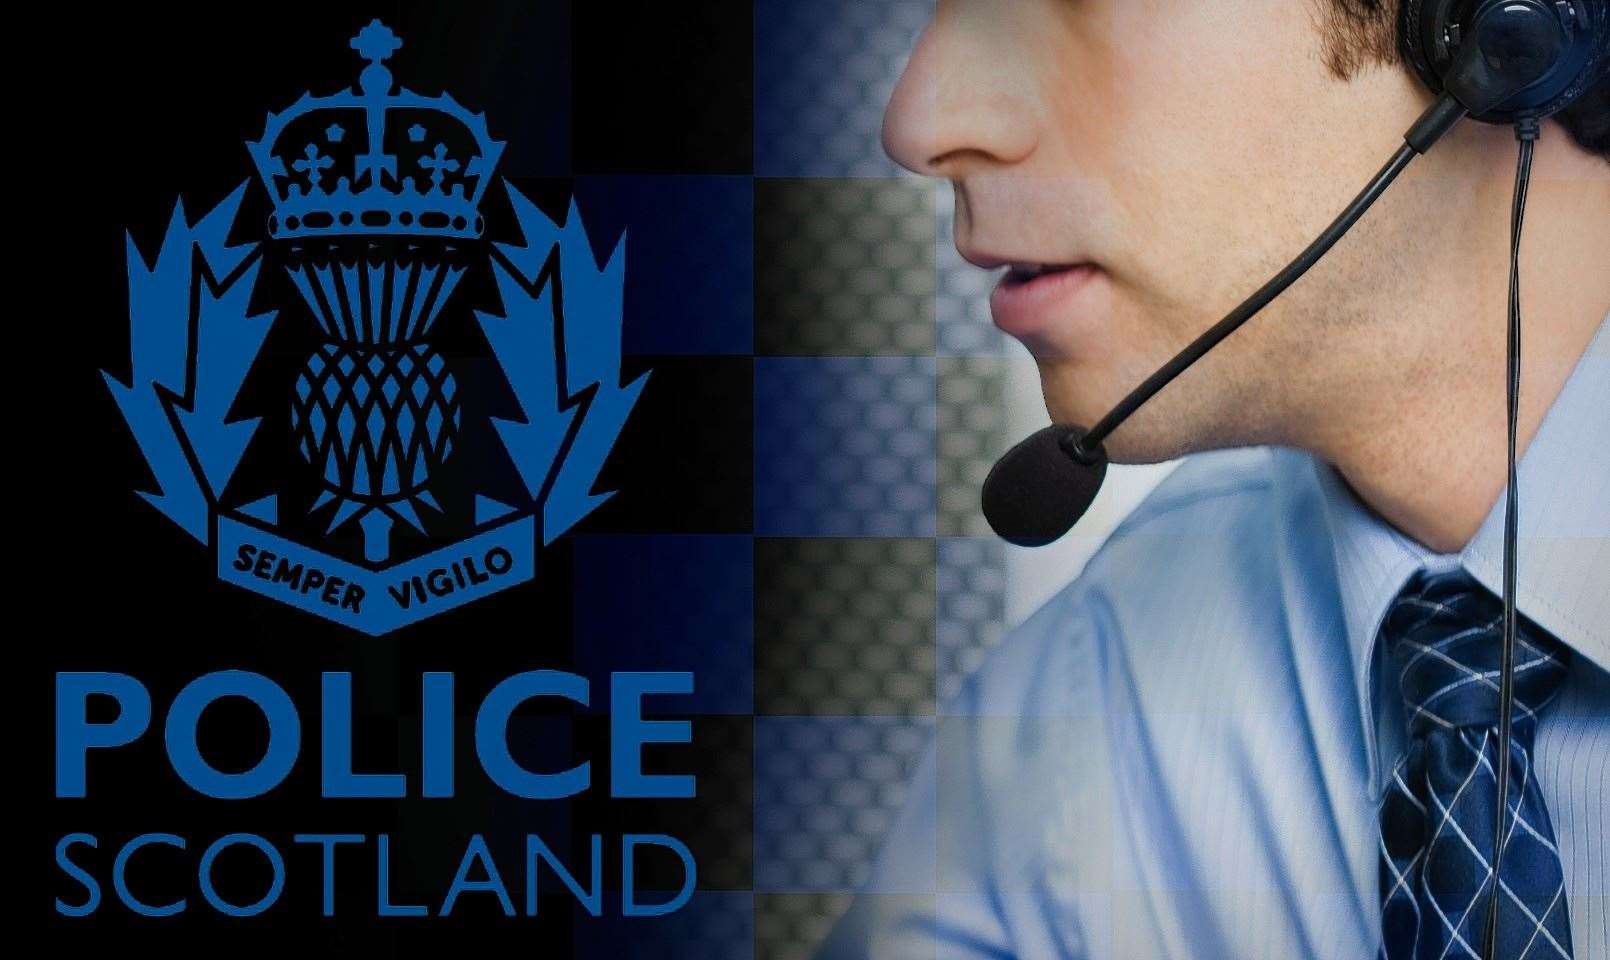 Police Scotland appeal.